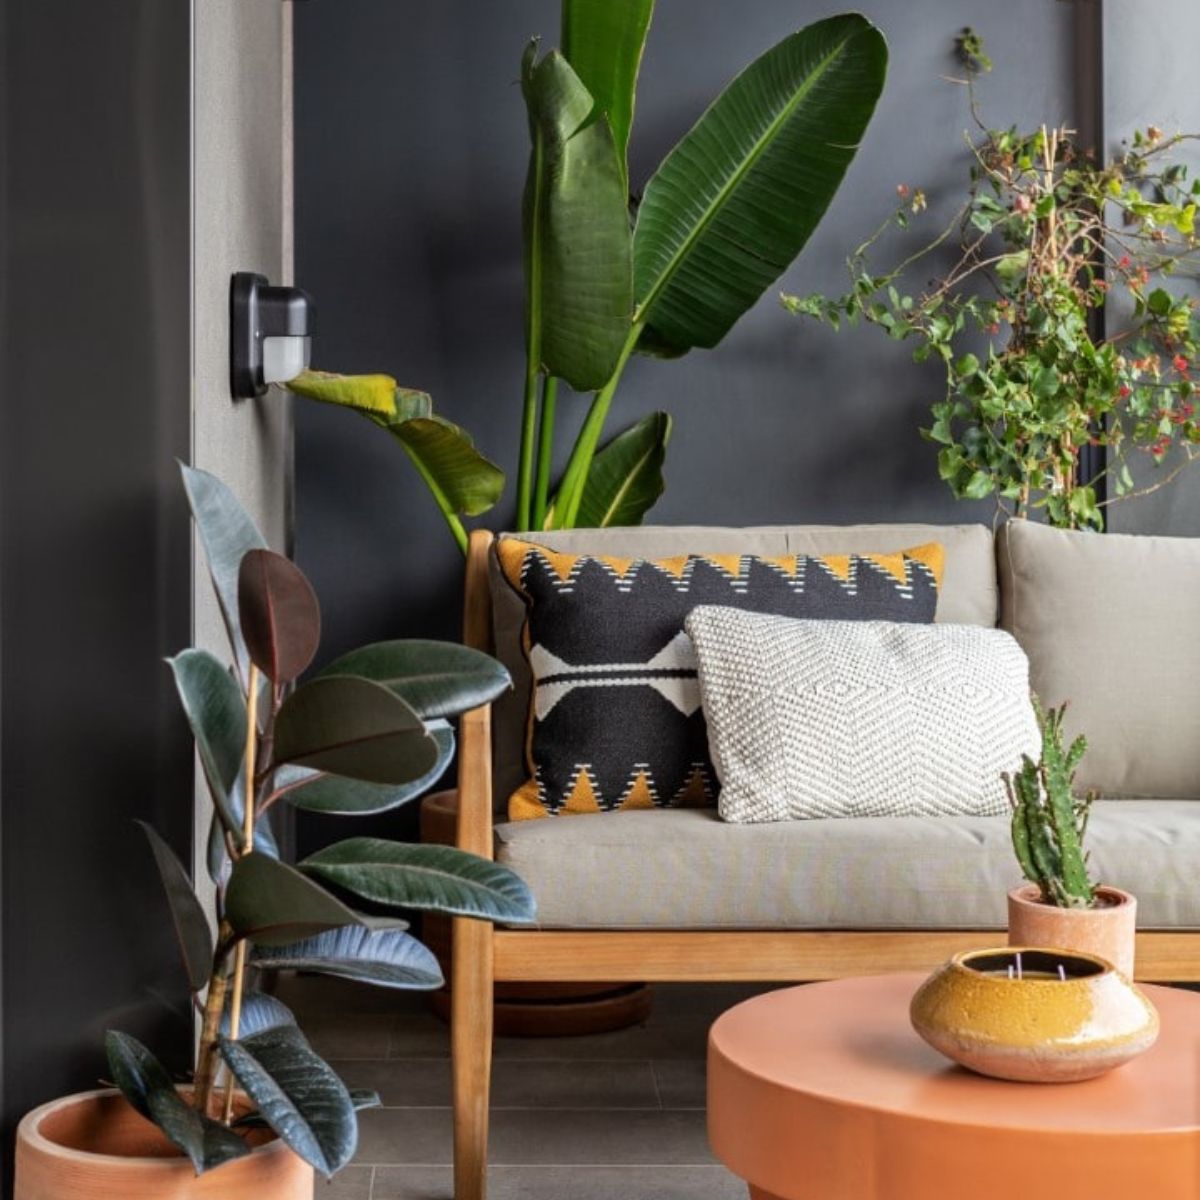 Interior decorating with plants with contrasting green colors on Thursd